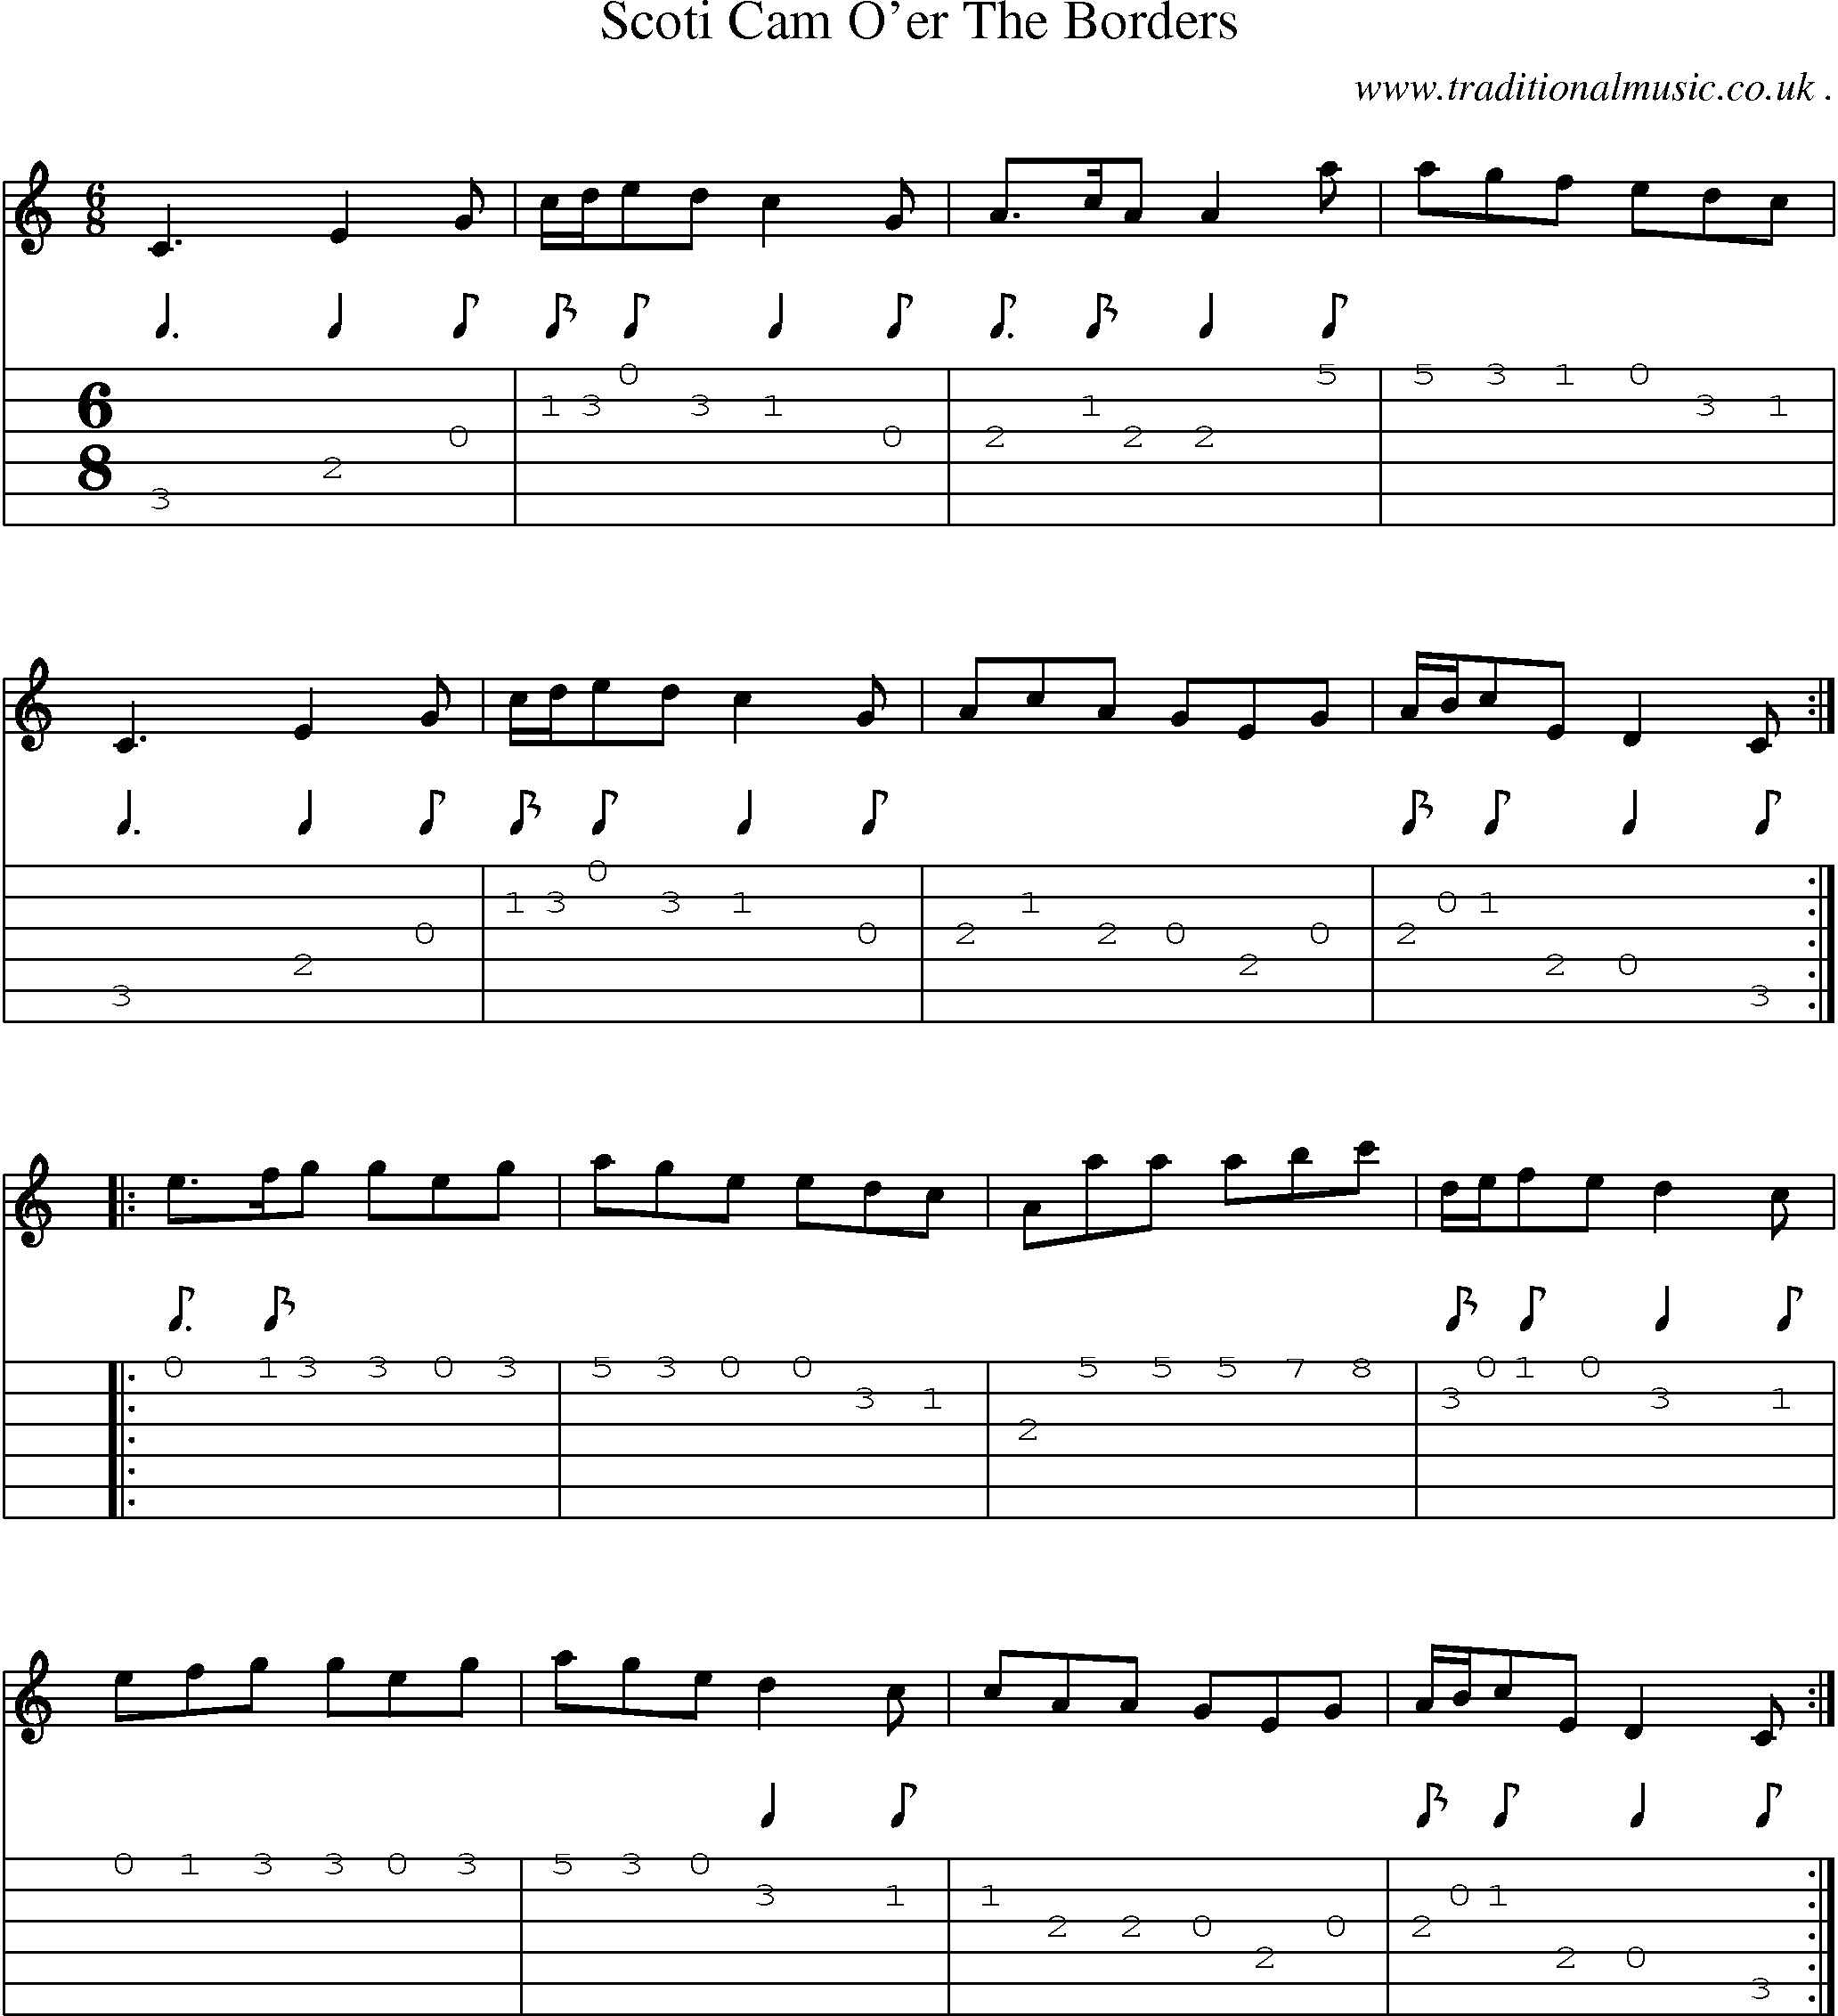 Sheet-Music and Guitar Tabs for Scoti Cam Oer The Borders